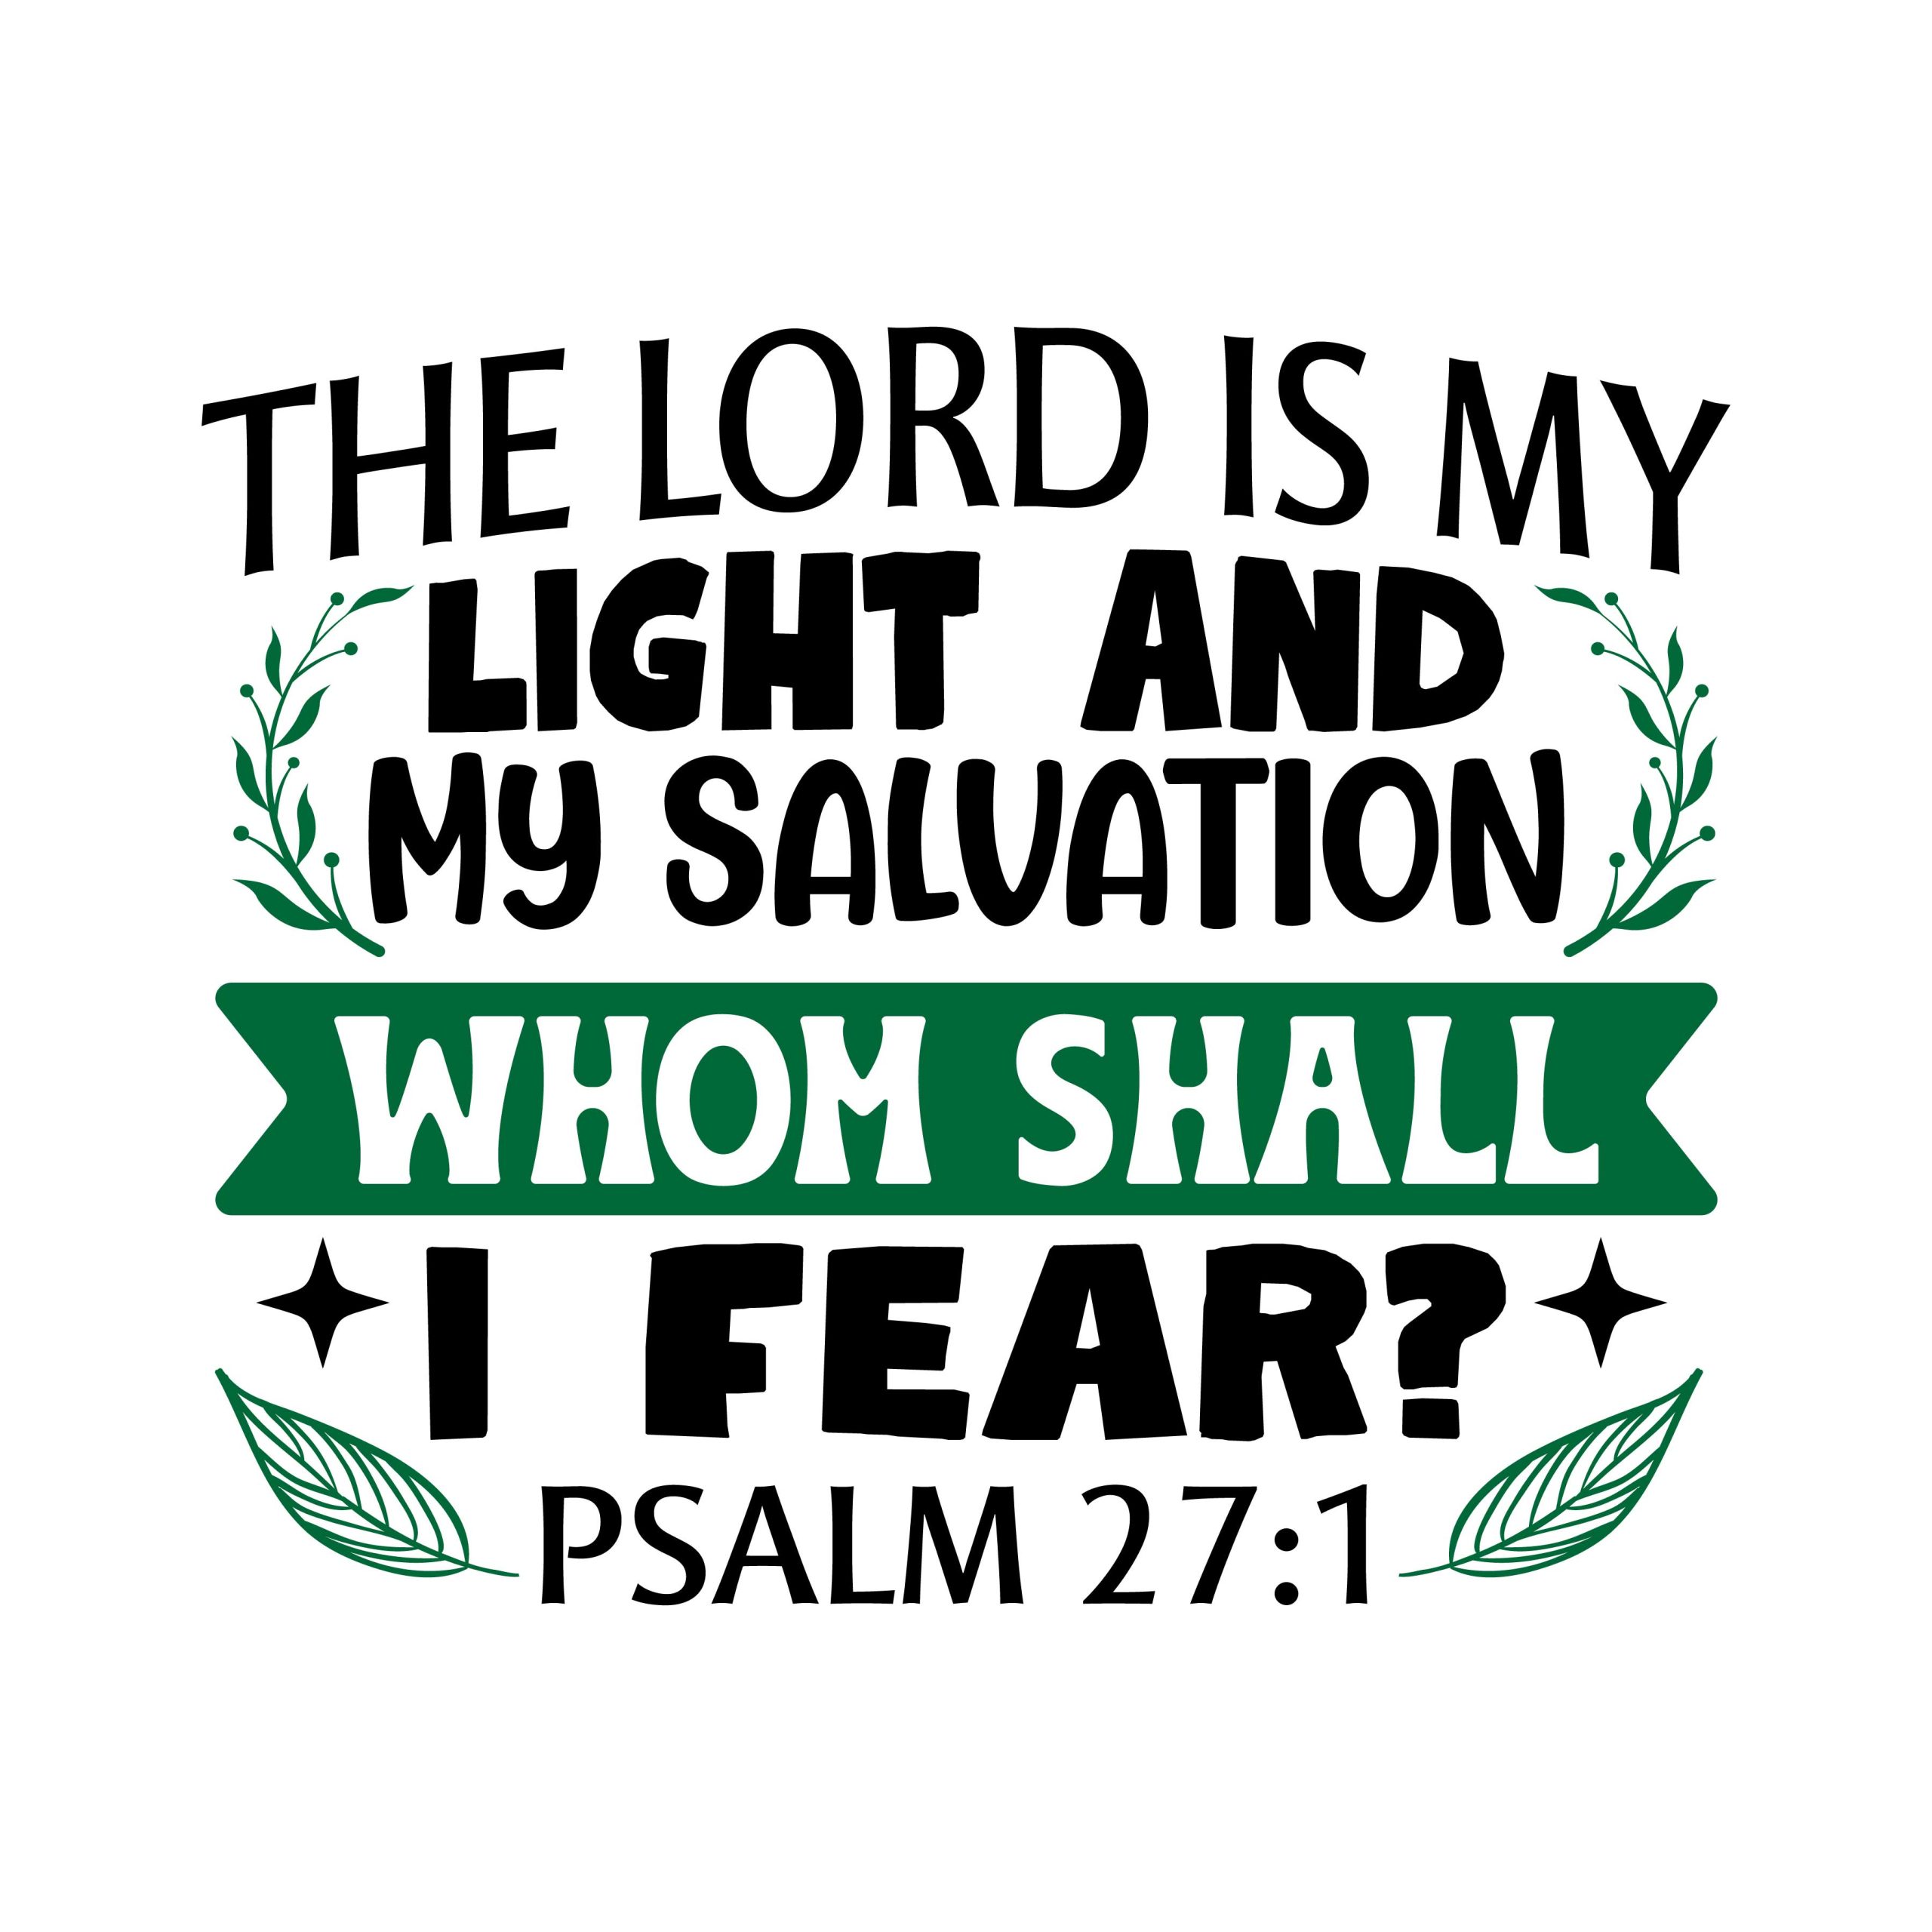 the lord is my light and my salvation whom shall i fear psalm 27:1, bible verses, scripture verses, svg files, passages, sayings, cricut designs, silhouette, embroidery, bundle, free cut files, design space, vector